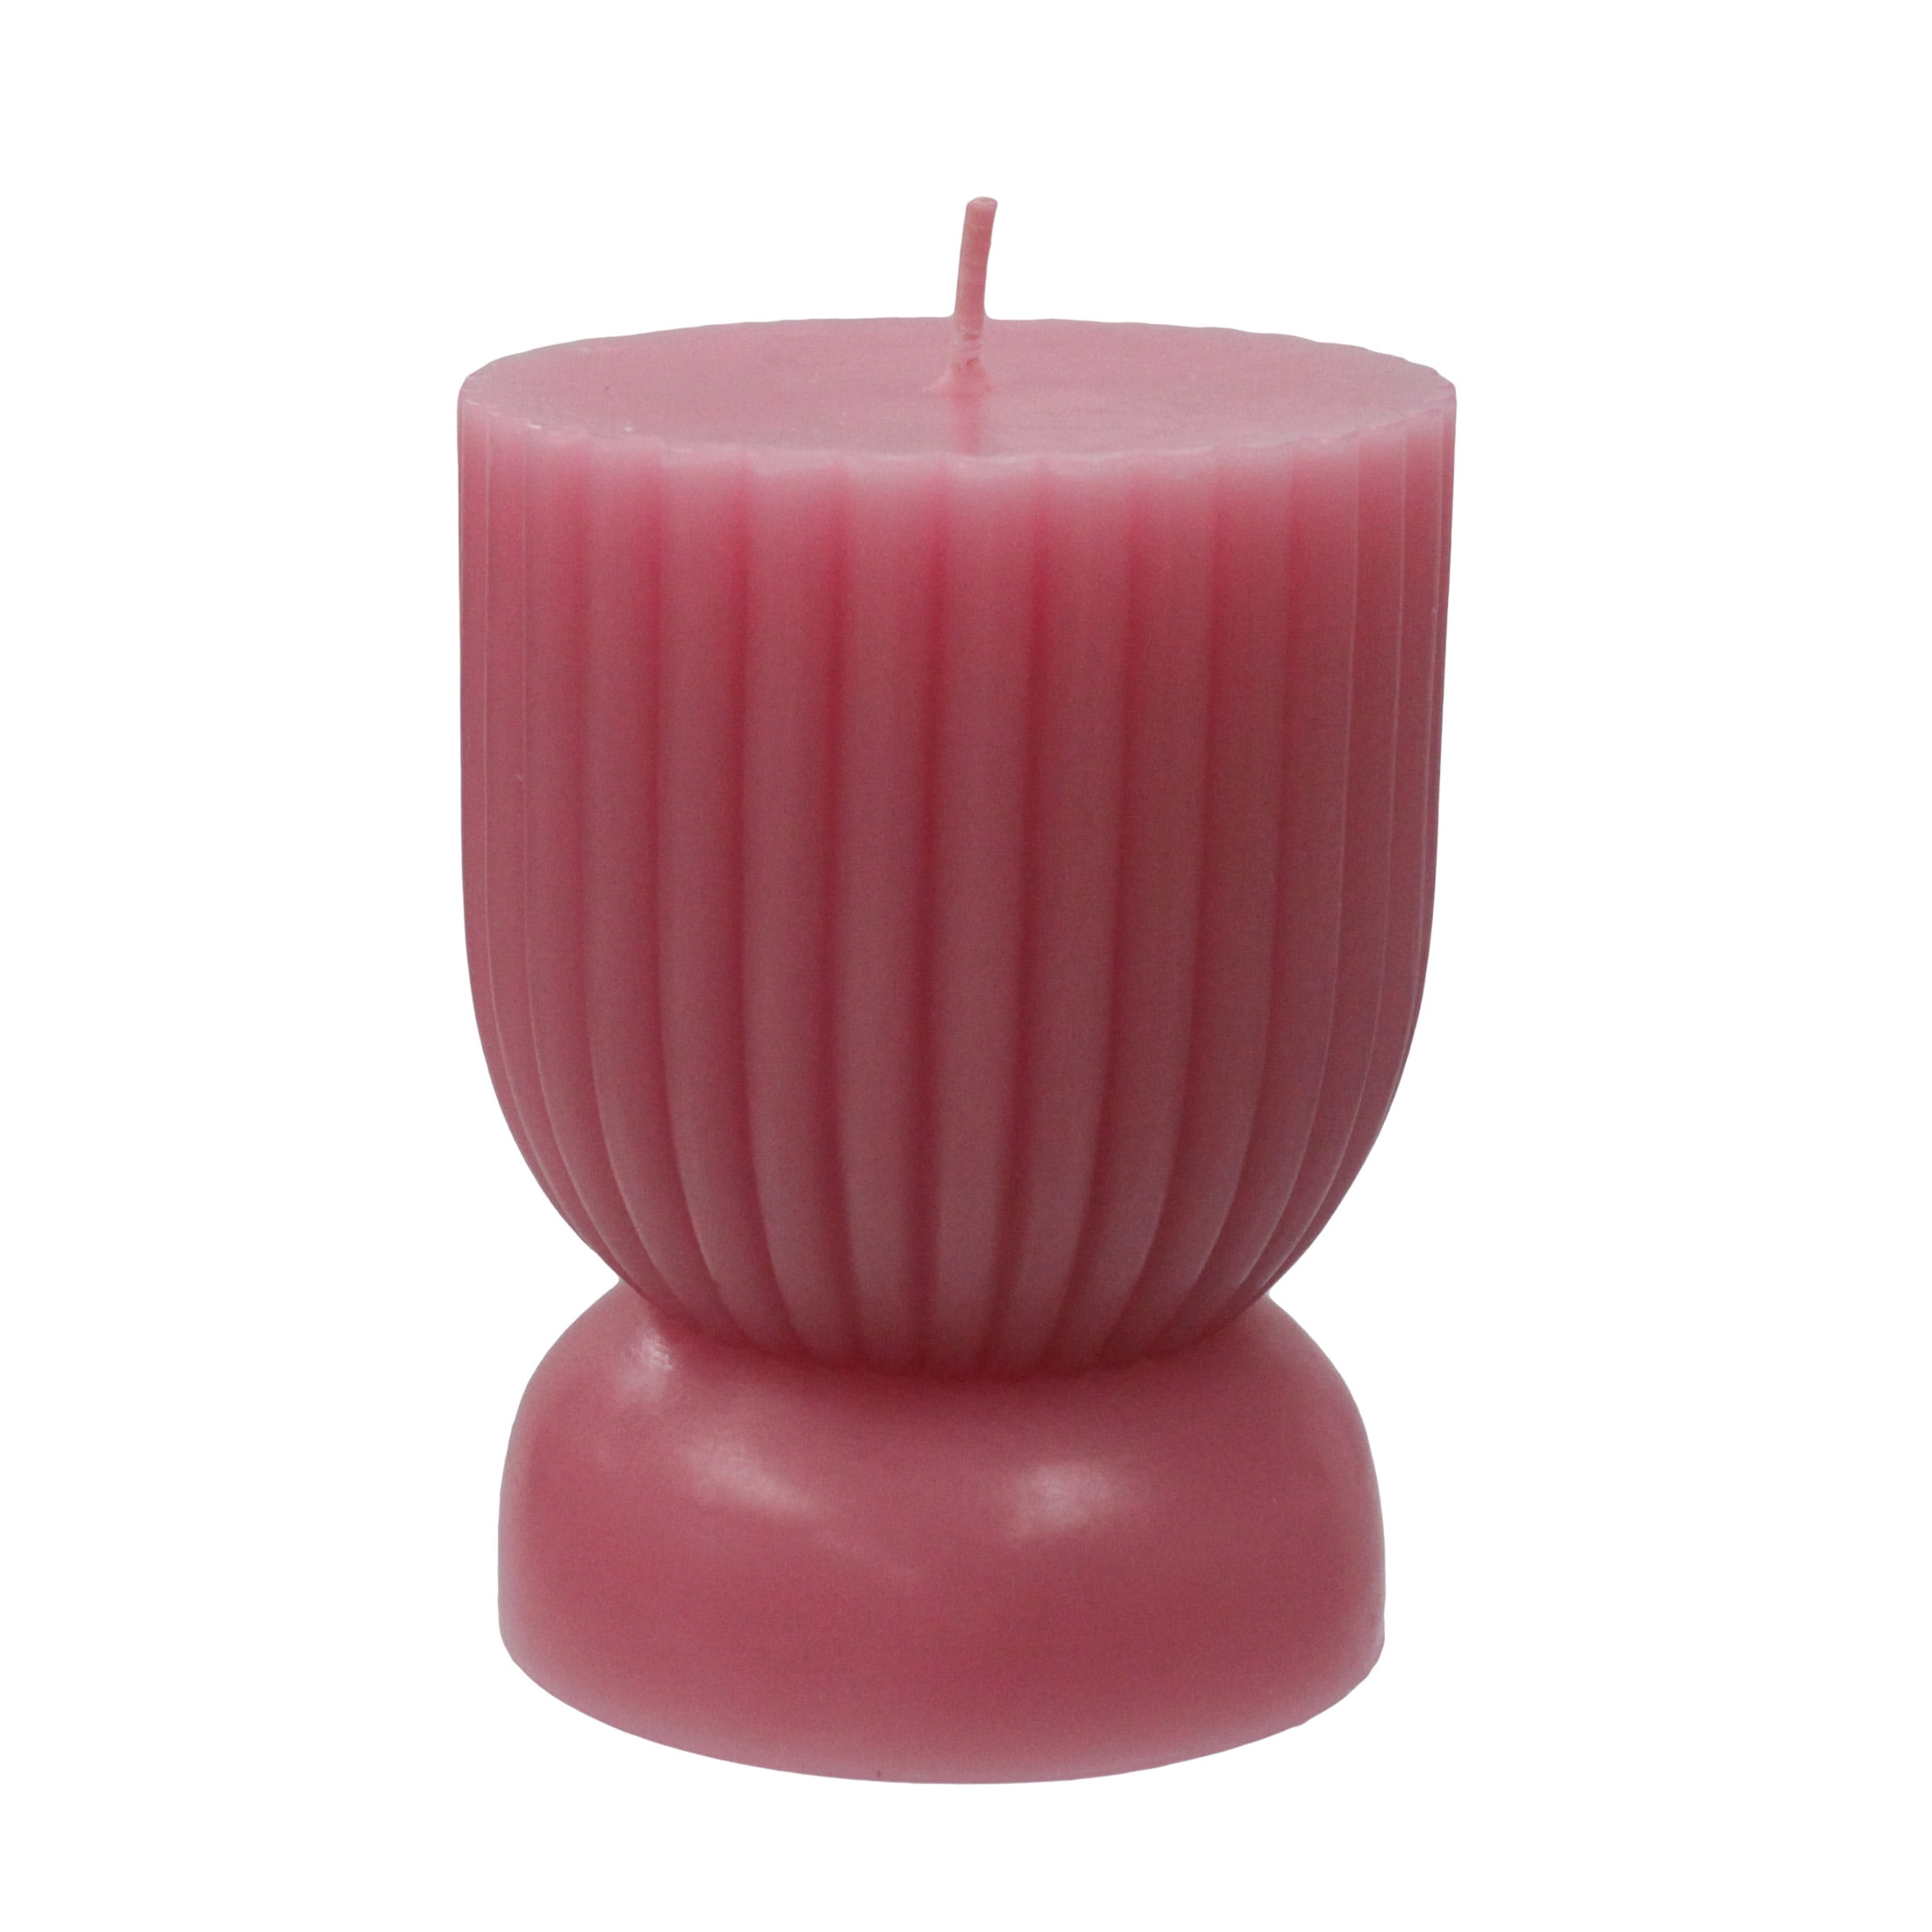 Better Homes & Gardens Unscented Ribbed Pillar Candle, 3x4 inches, Pink 